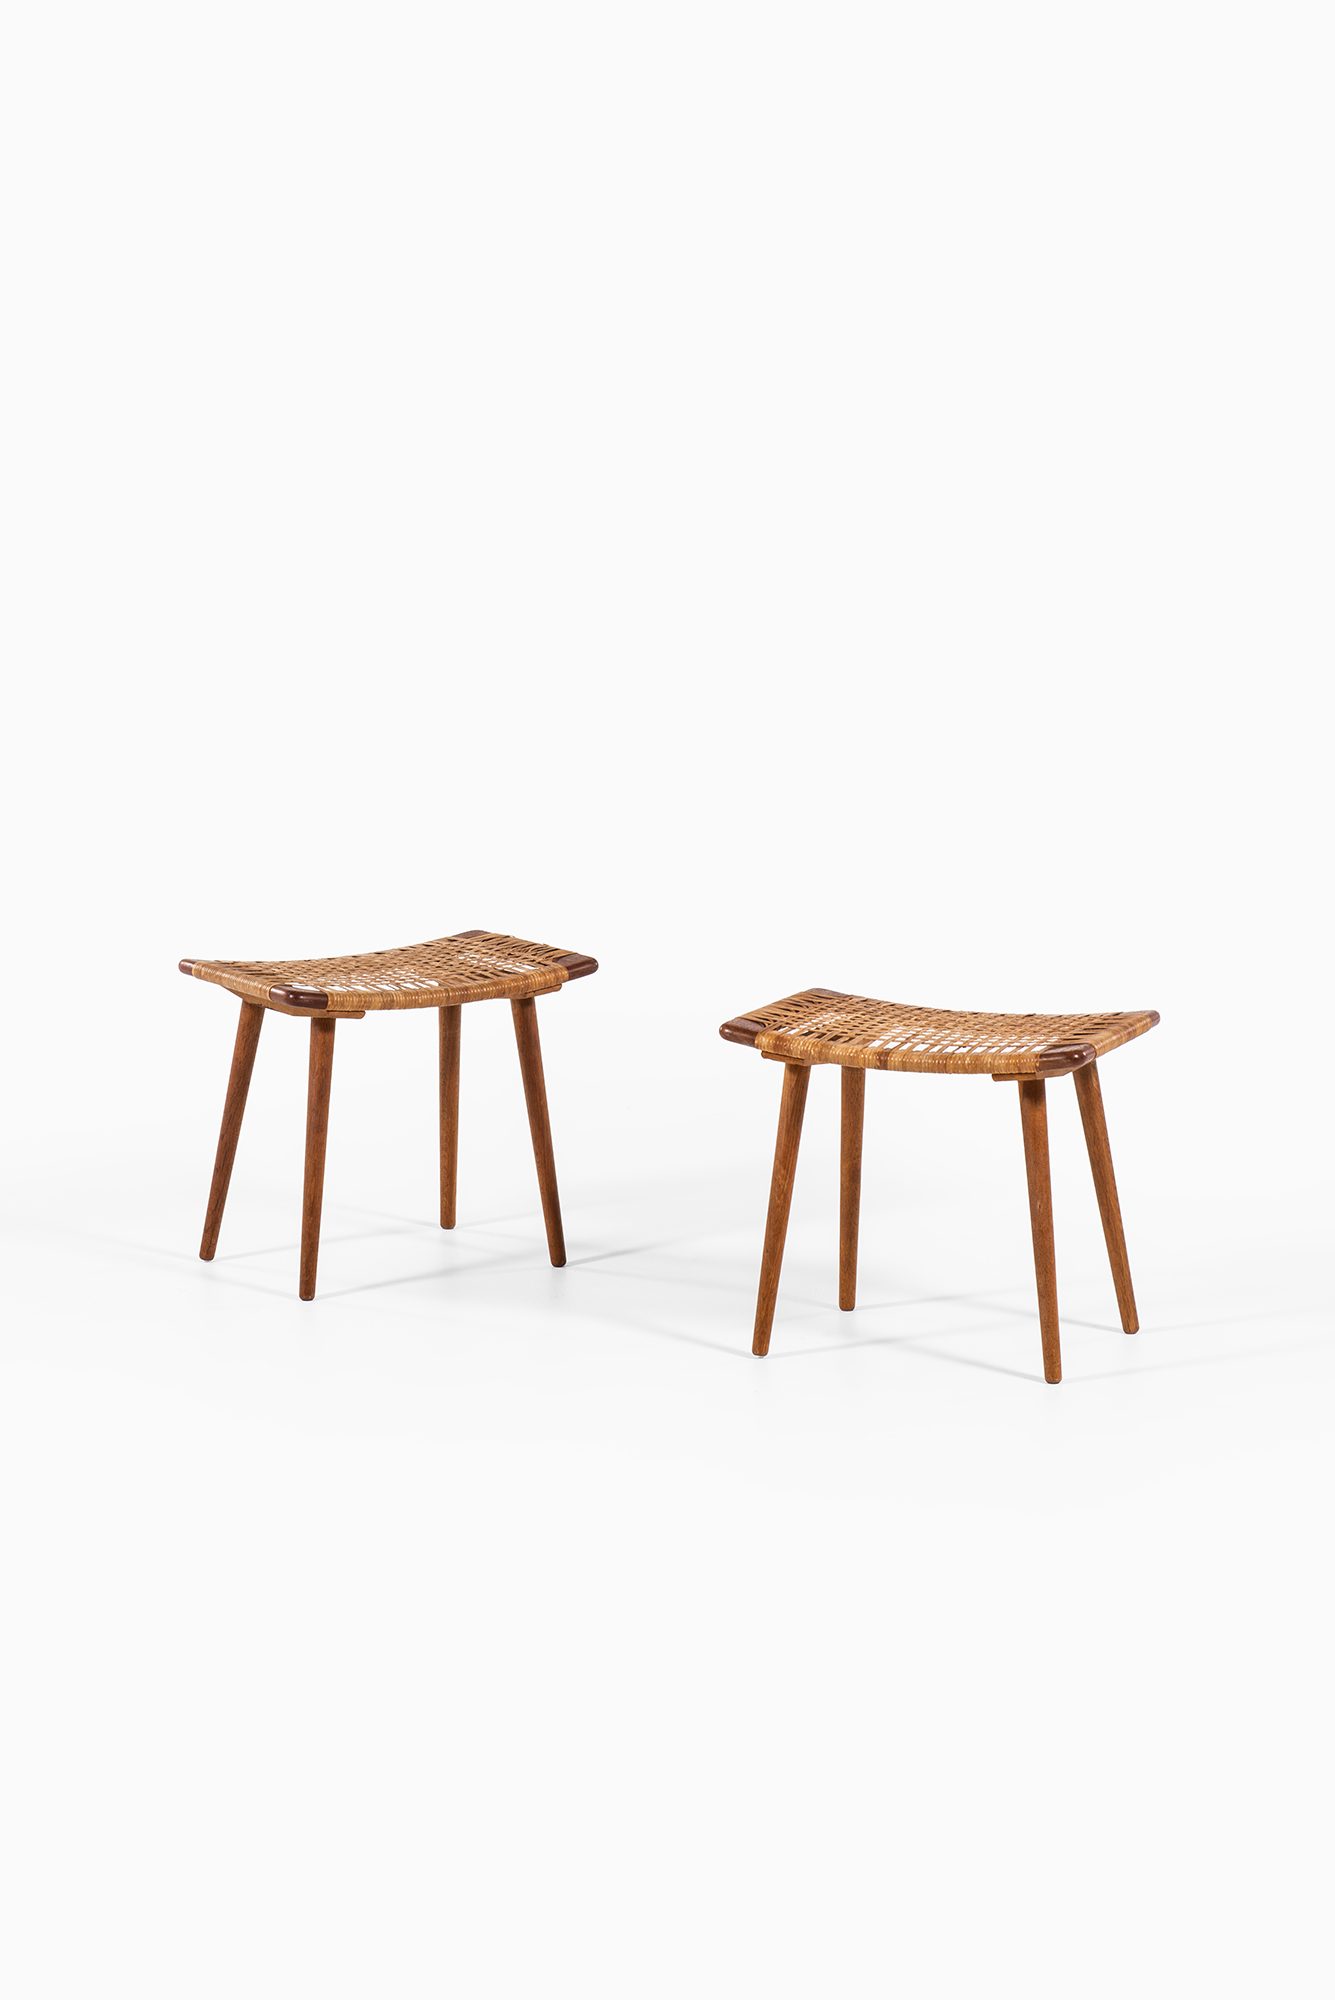 A pair of stools in oak and woven cane at Studio Schalling